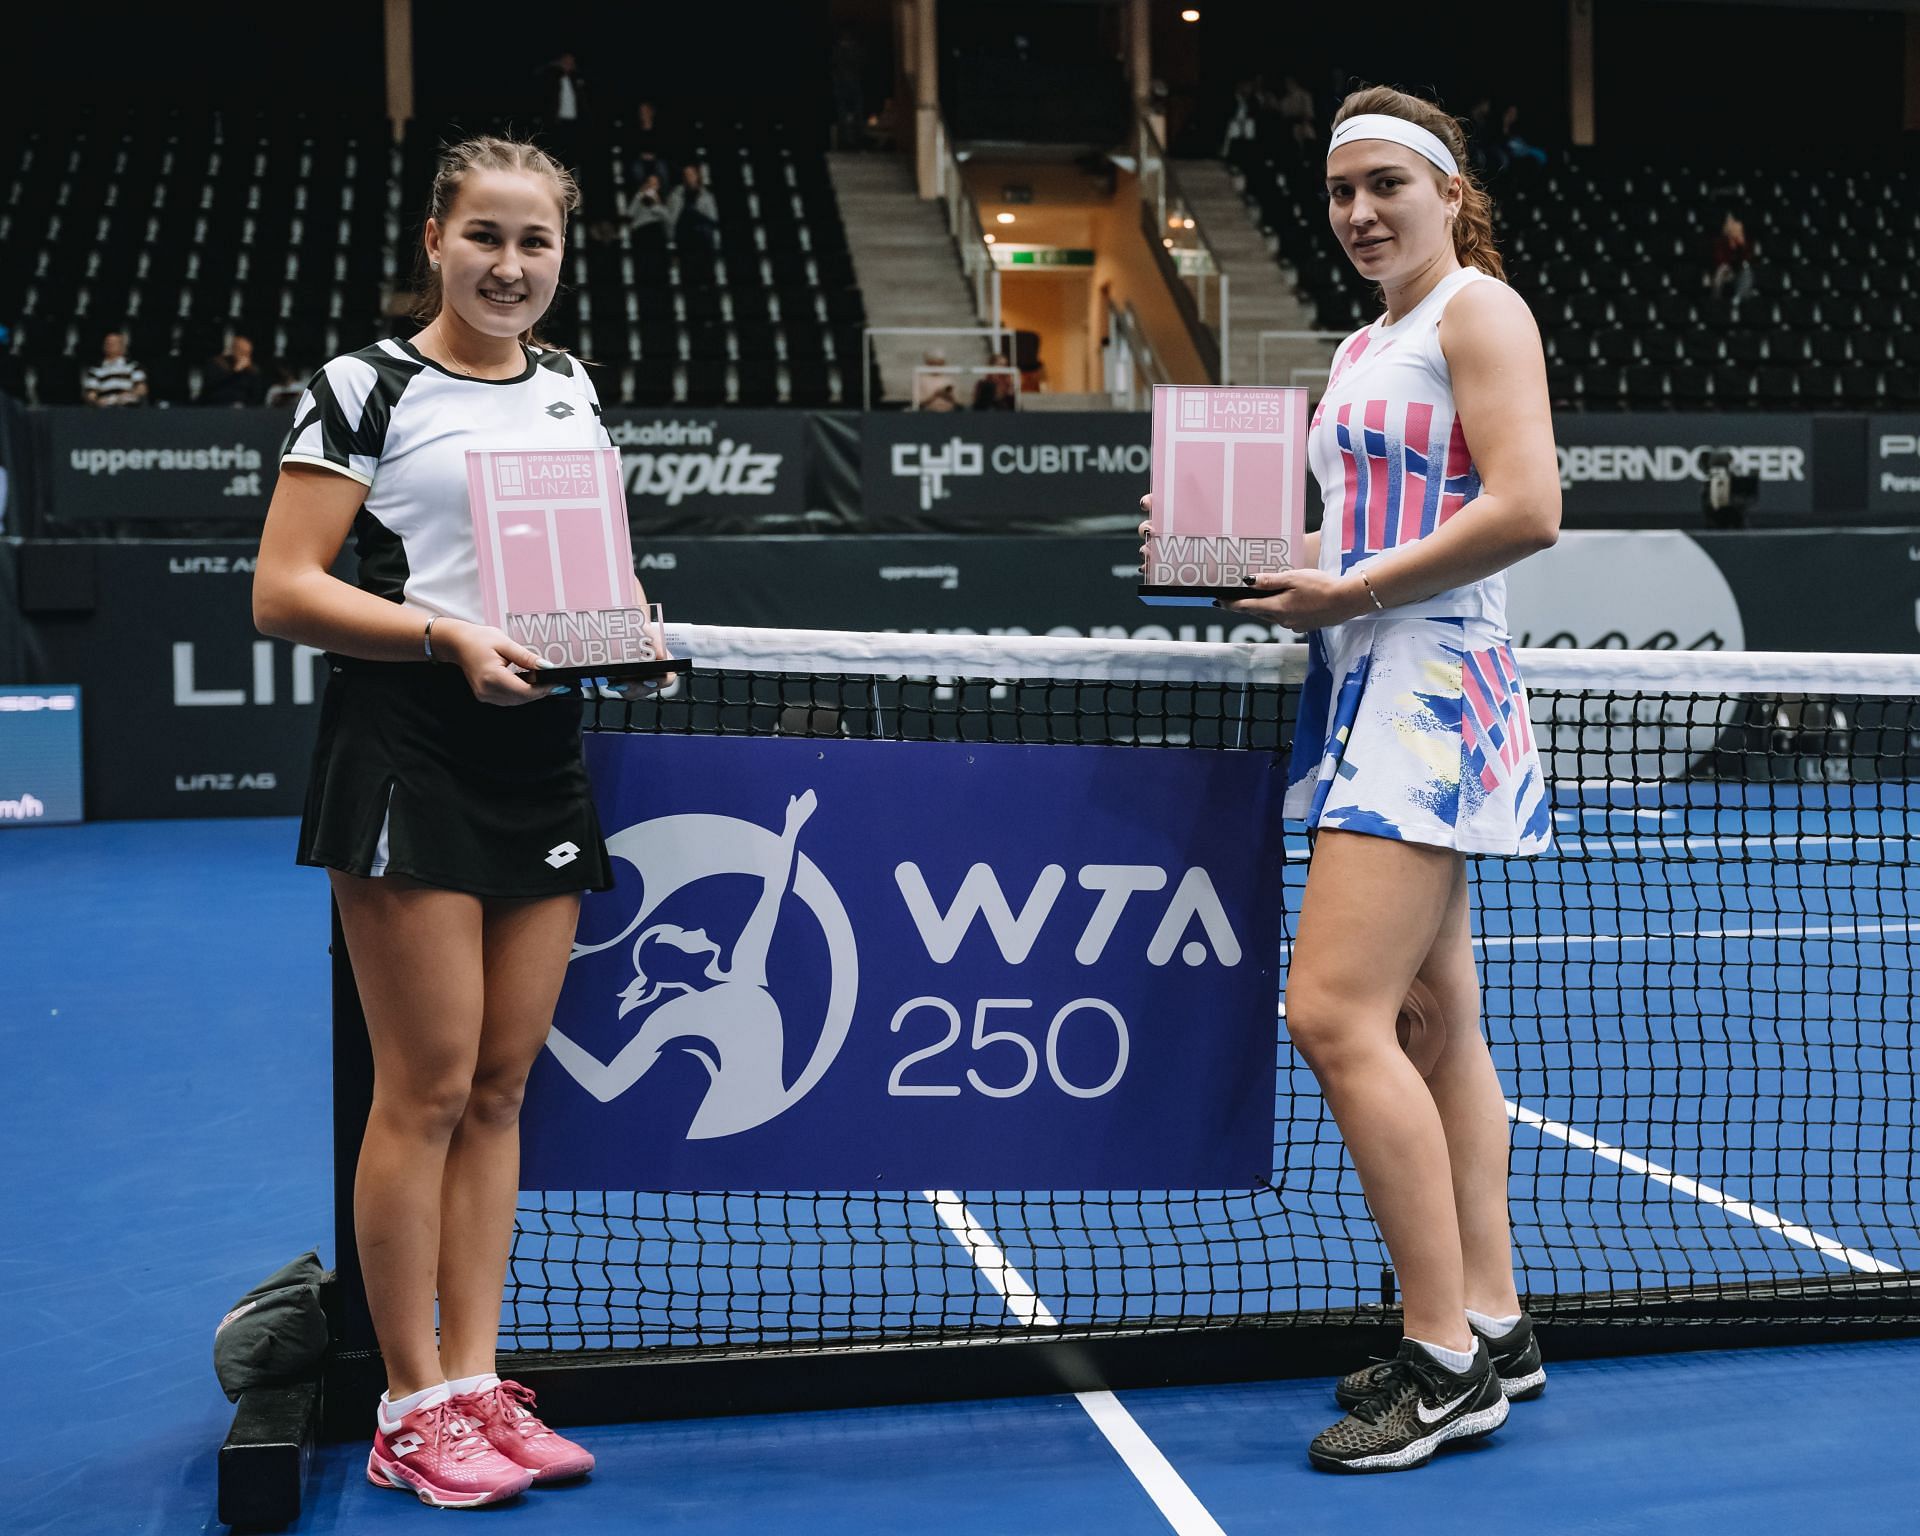 Natela Dzalamidze (right) will compete at the 2022 Wimbledon after taking citizenship in Georgia